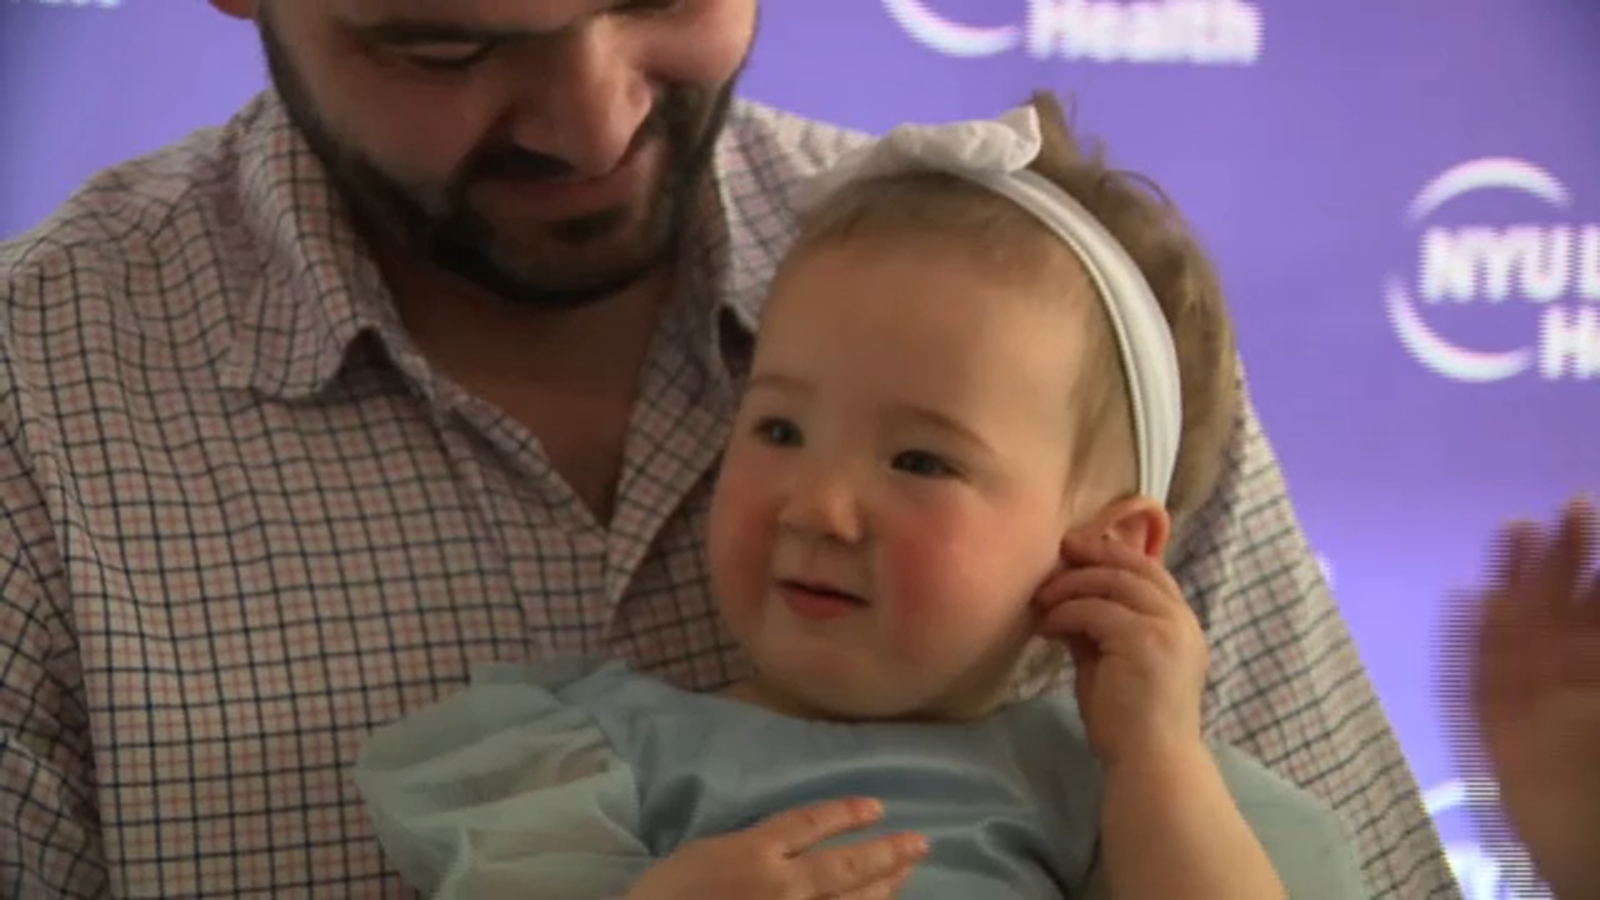 NYU Langone Hospital Long Island performs successful jaw surgery to help baby with cleft palate breathe easier [Video]